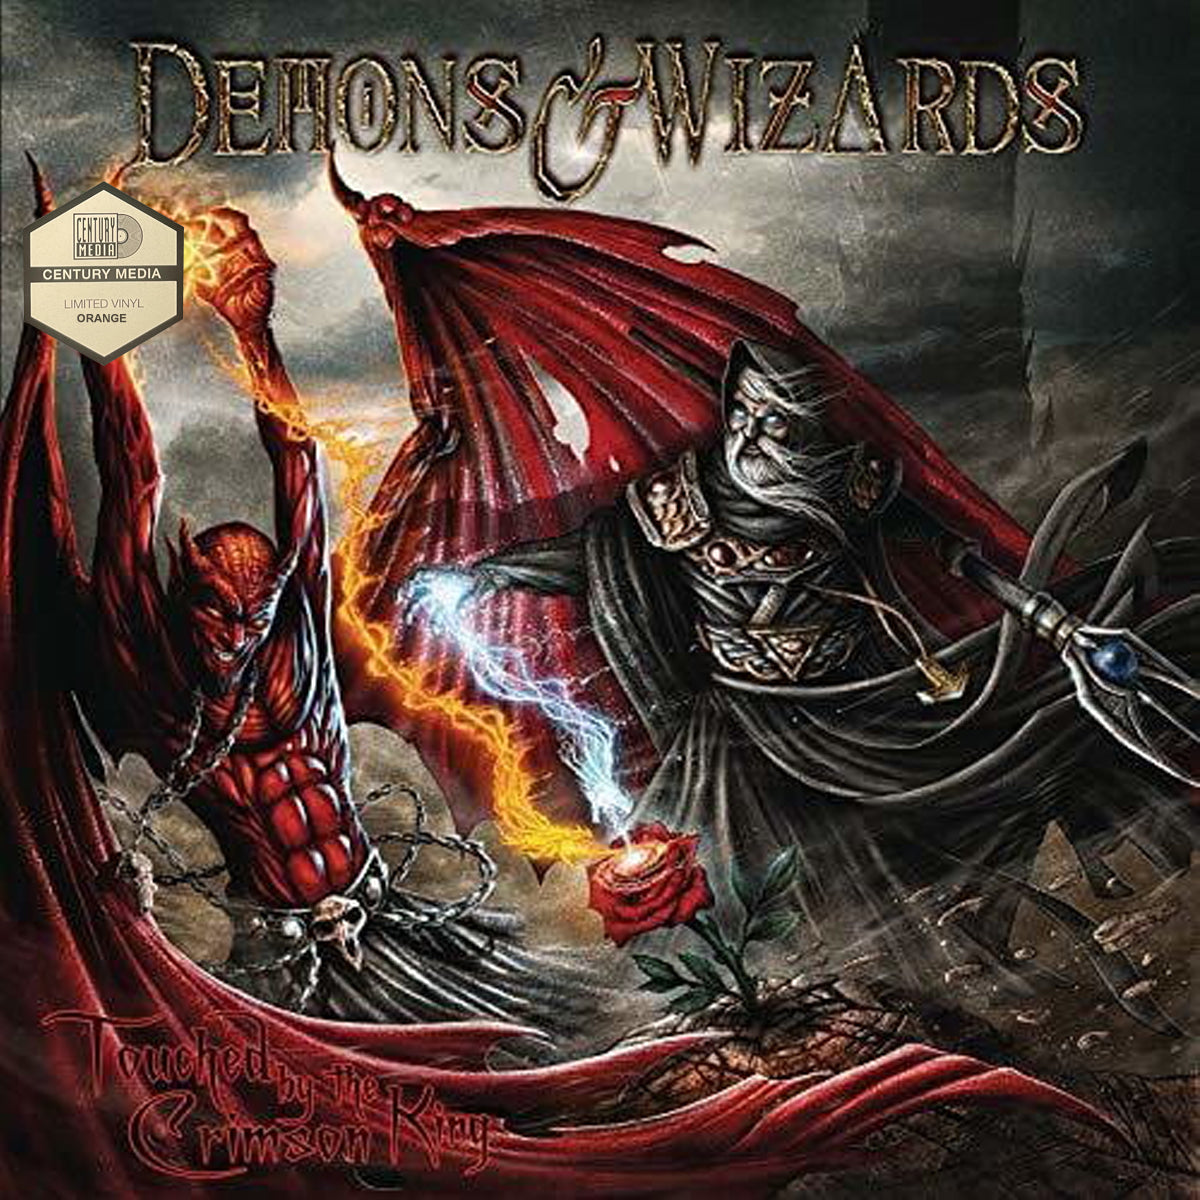 DEMONS & WIZARDS - Touched By The Crimson King Vinyl LP - Orange